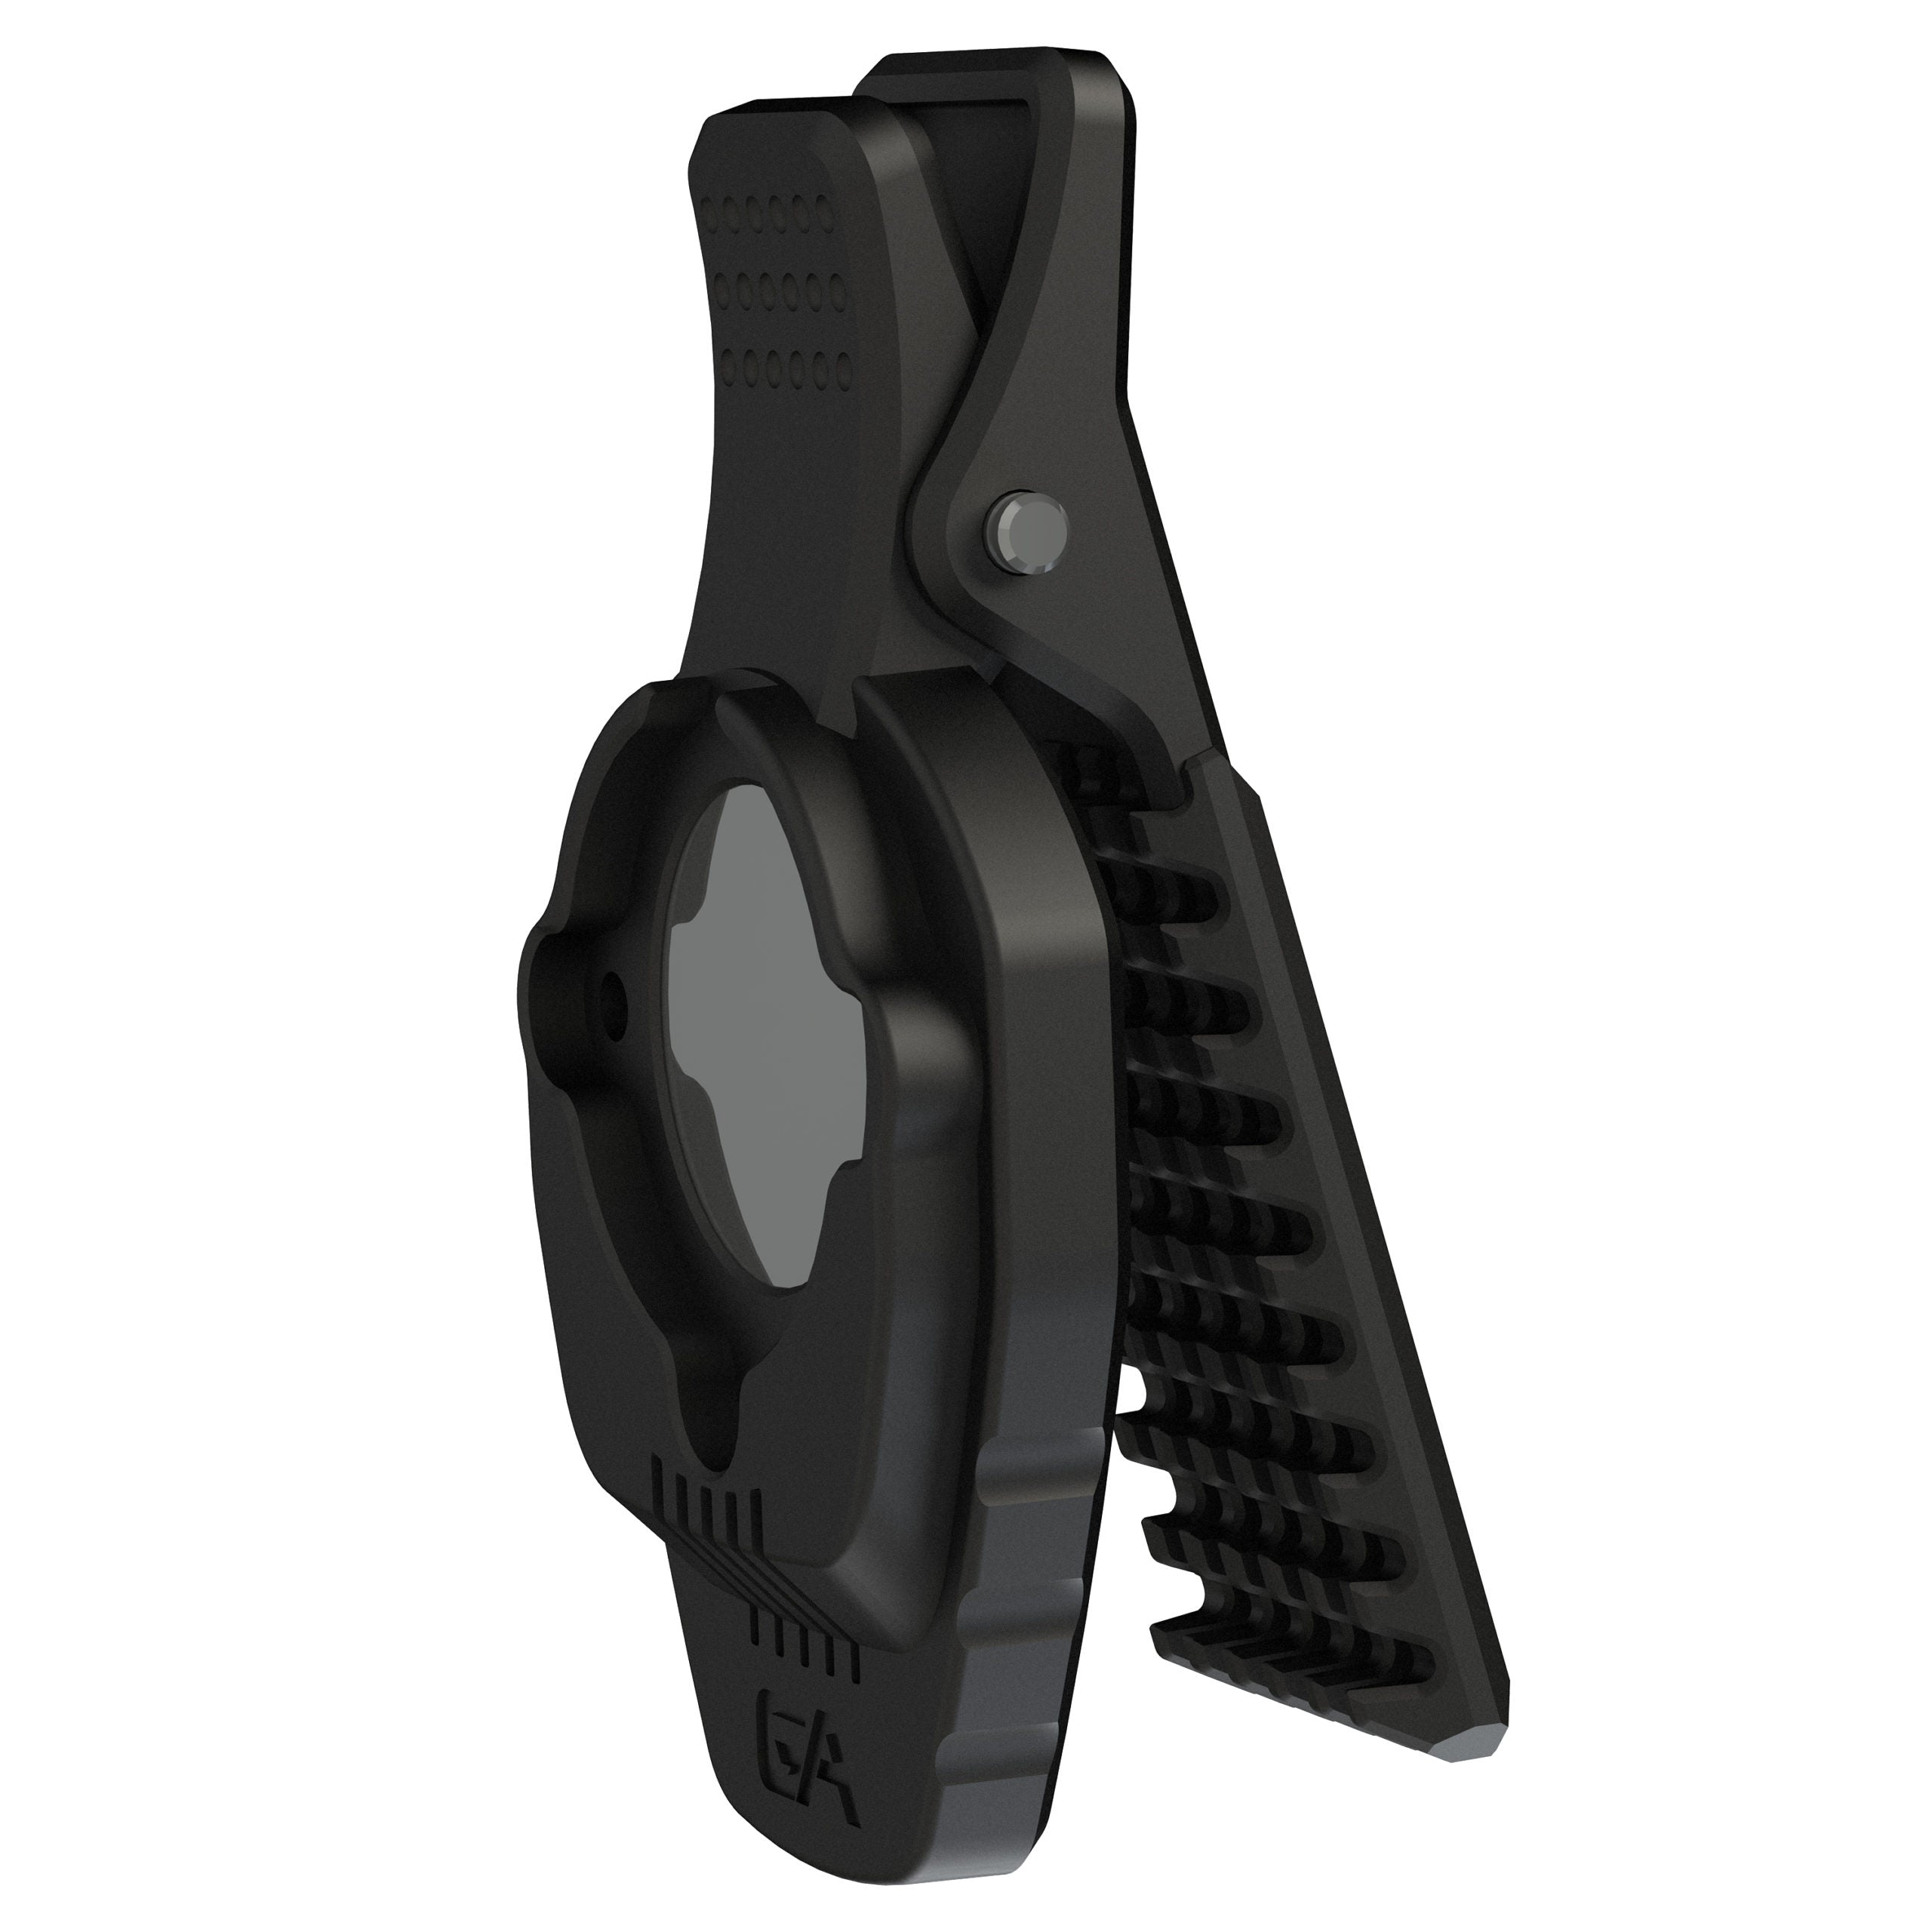 Guardian Angel Jaw Clip Spring Mount with Magnetic Mount (ACC-JCM)